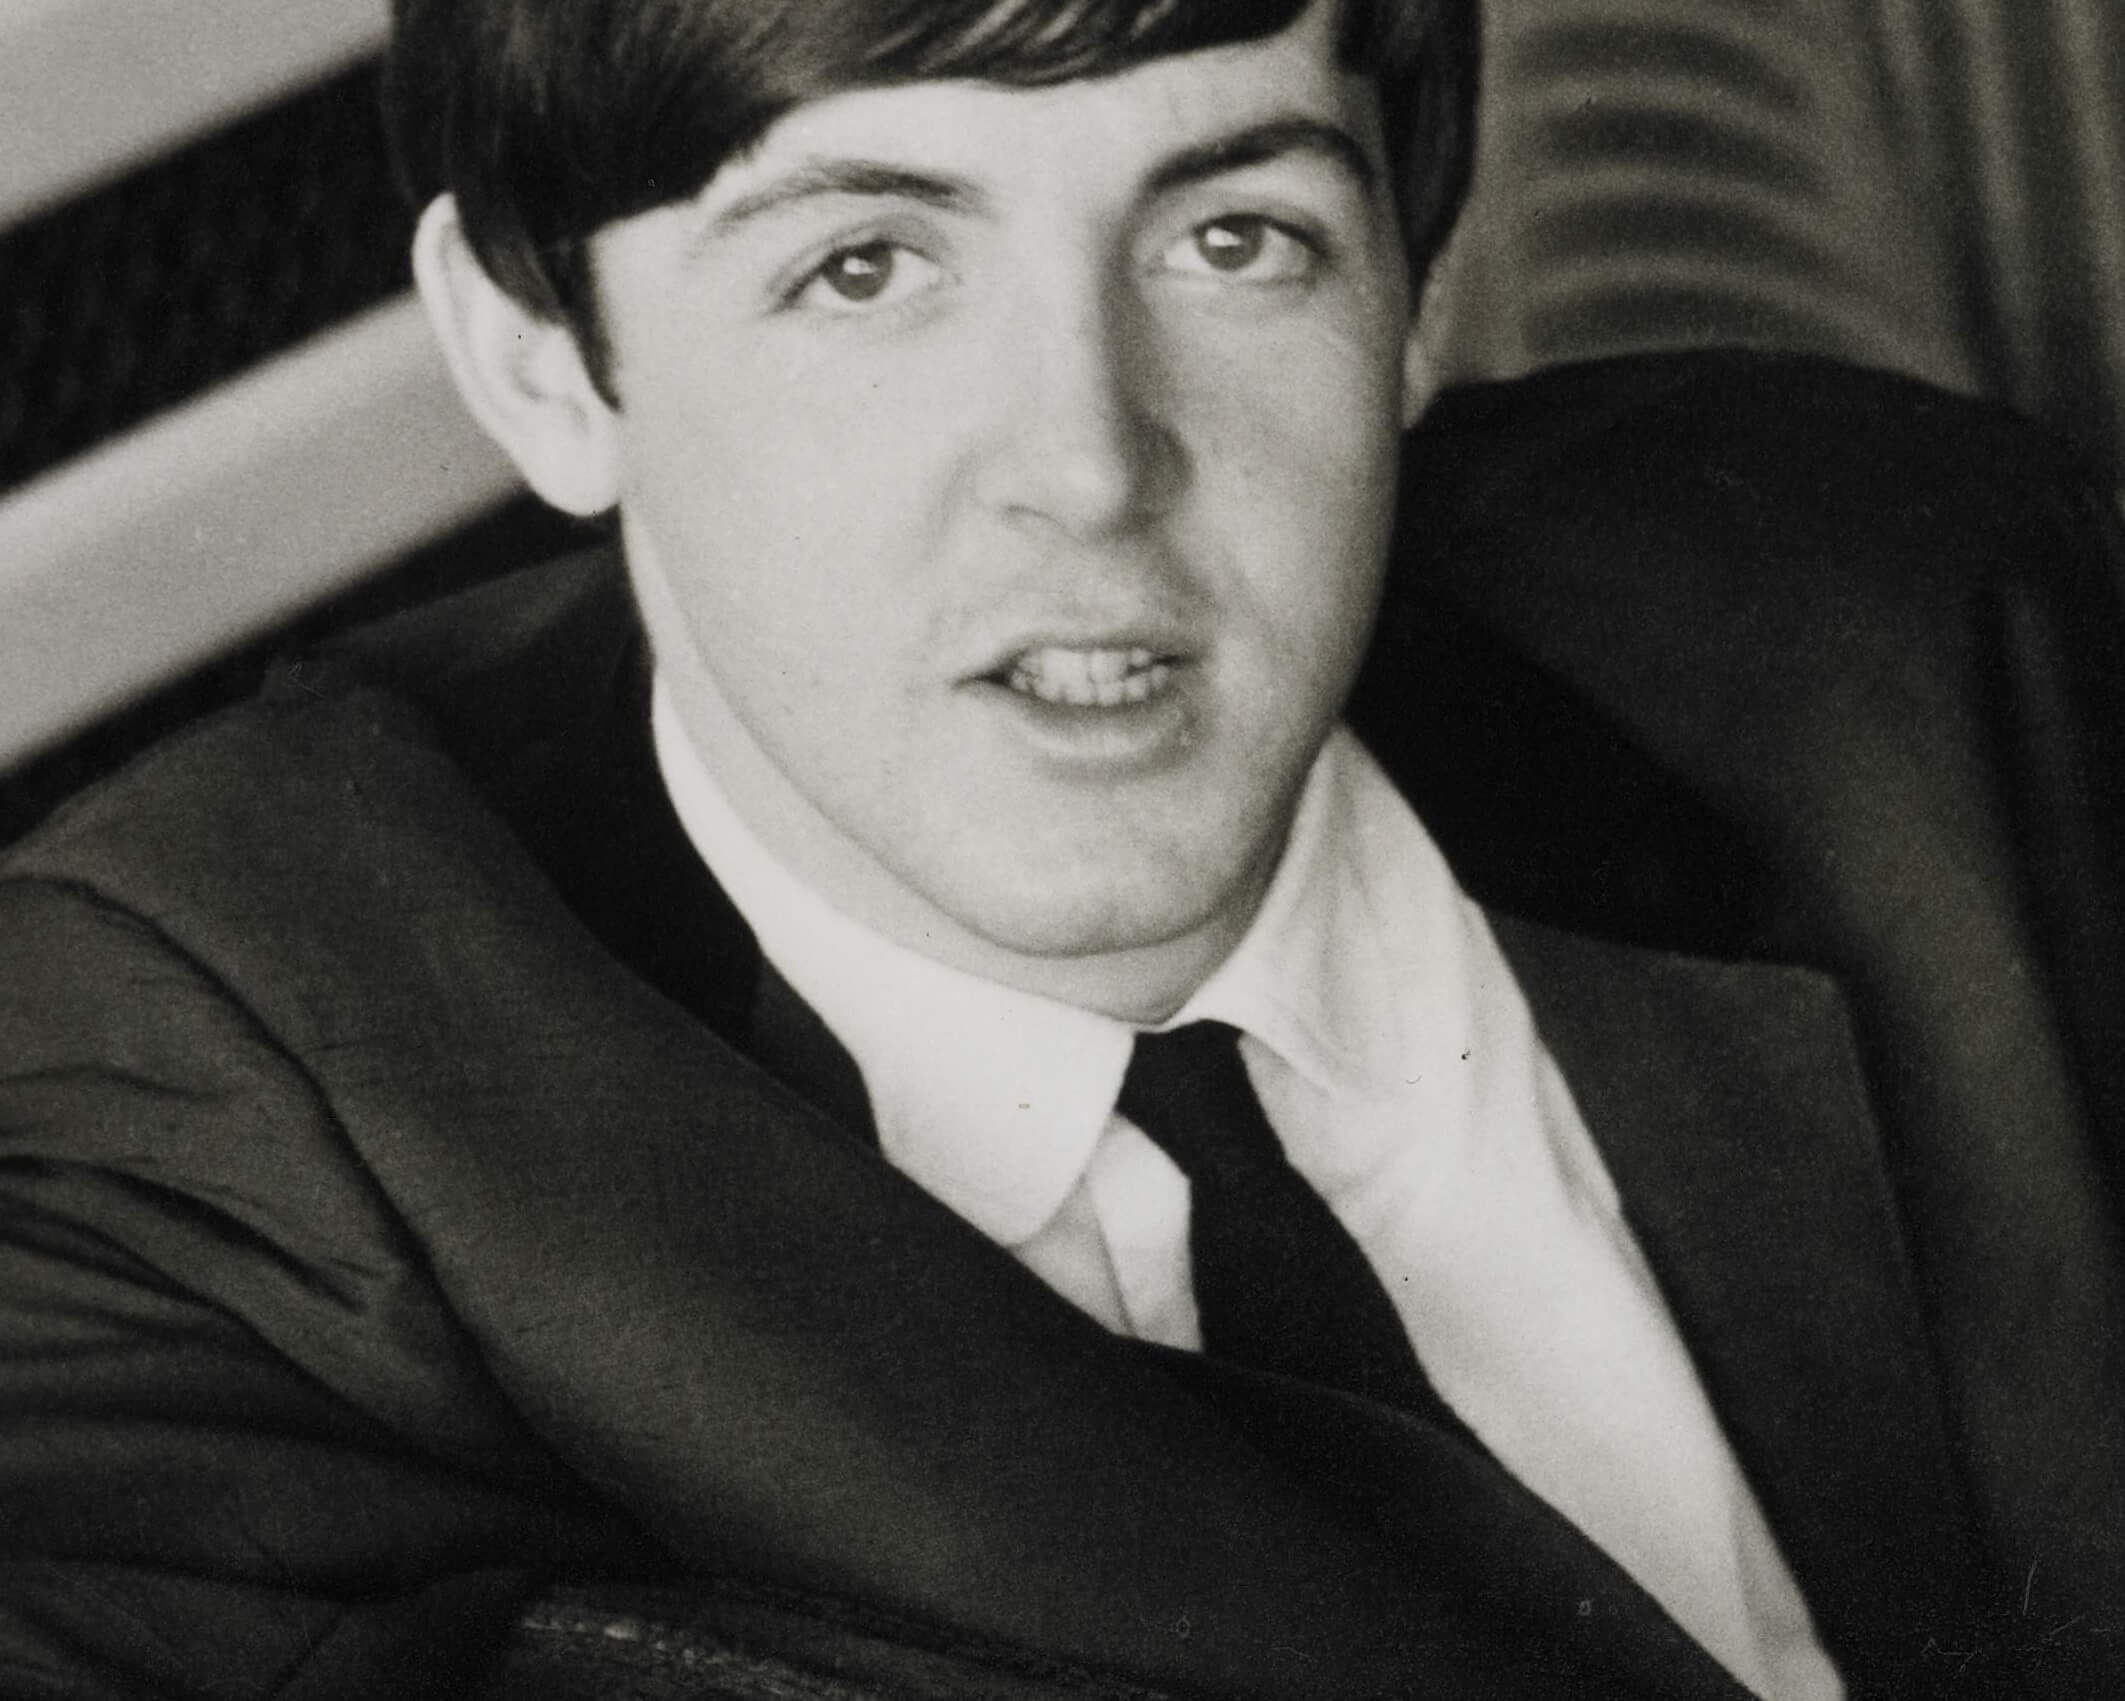 Paul McCartney in a suit during The Beatles' "Yesterday" era